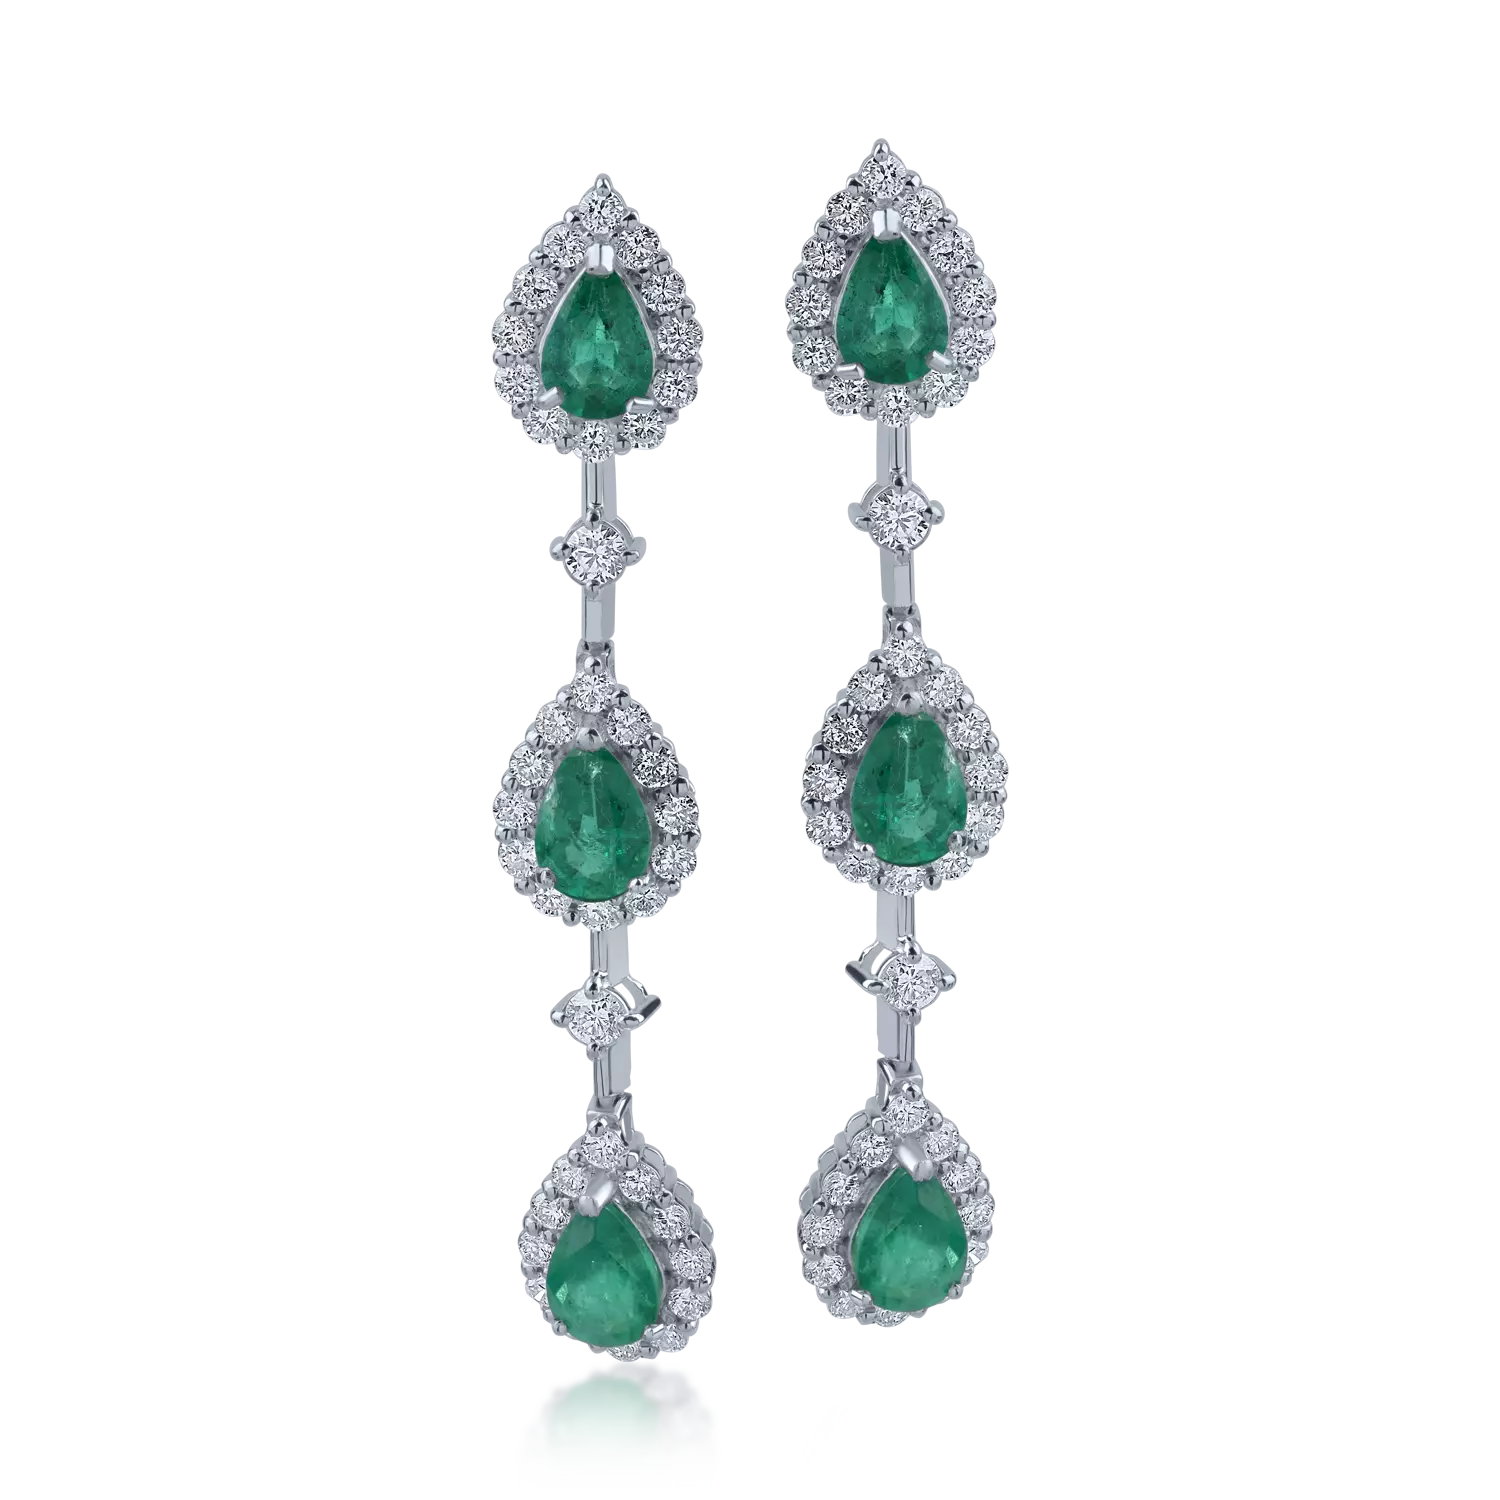 Platinum earrings with 2.16ct emeralds and 1.28ct diamonds